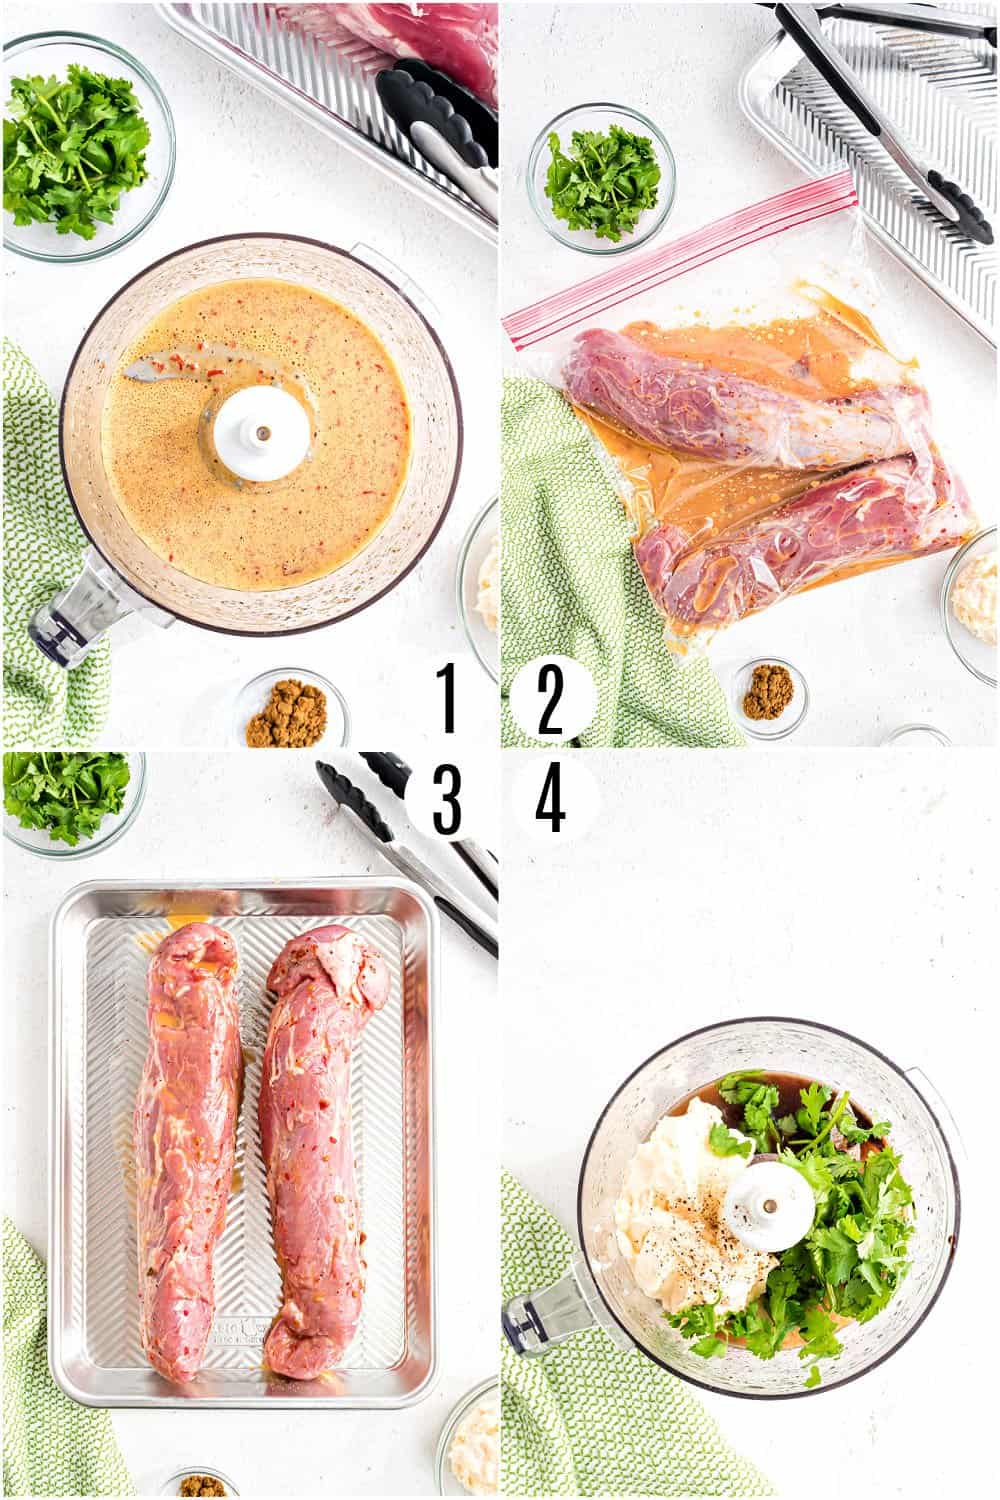 Step by step photos showing how to make pork tenderloin with chipotles.